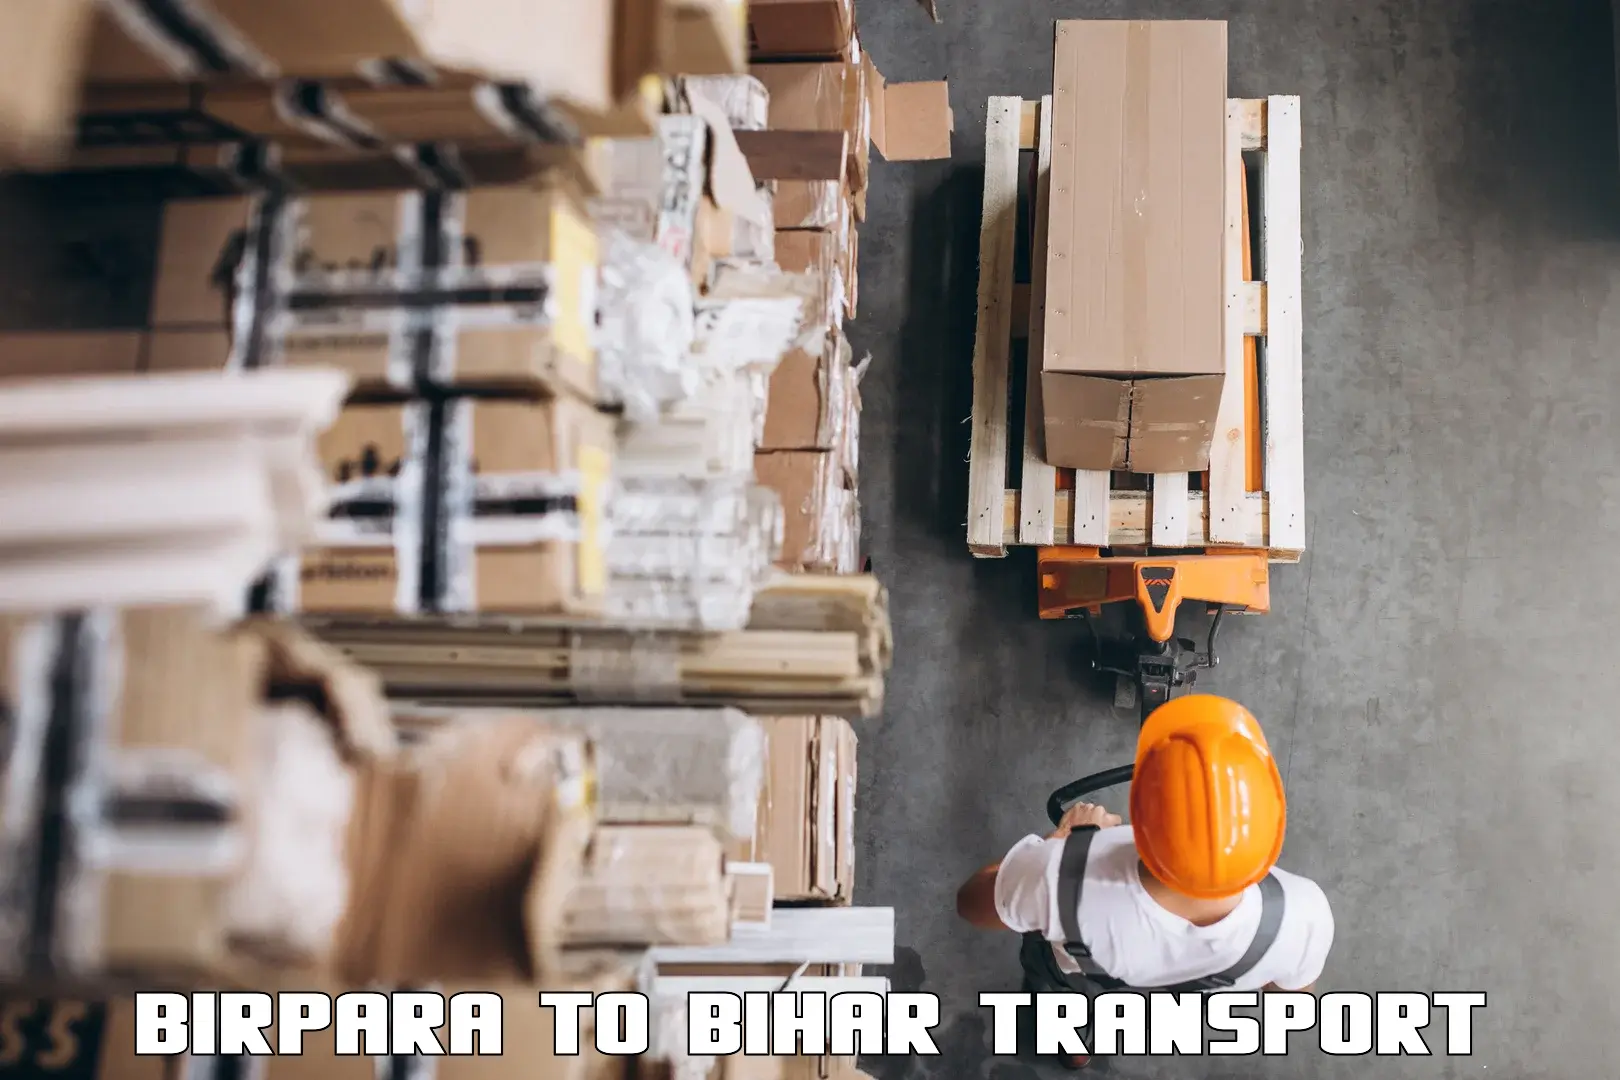 Daily parcel service transport Birpara to Munger